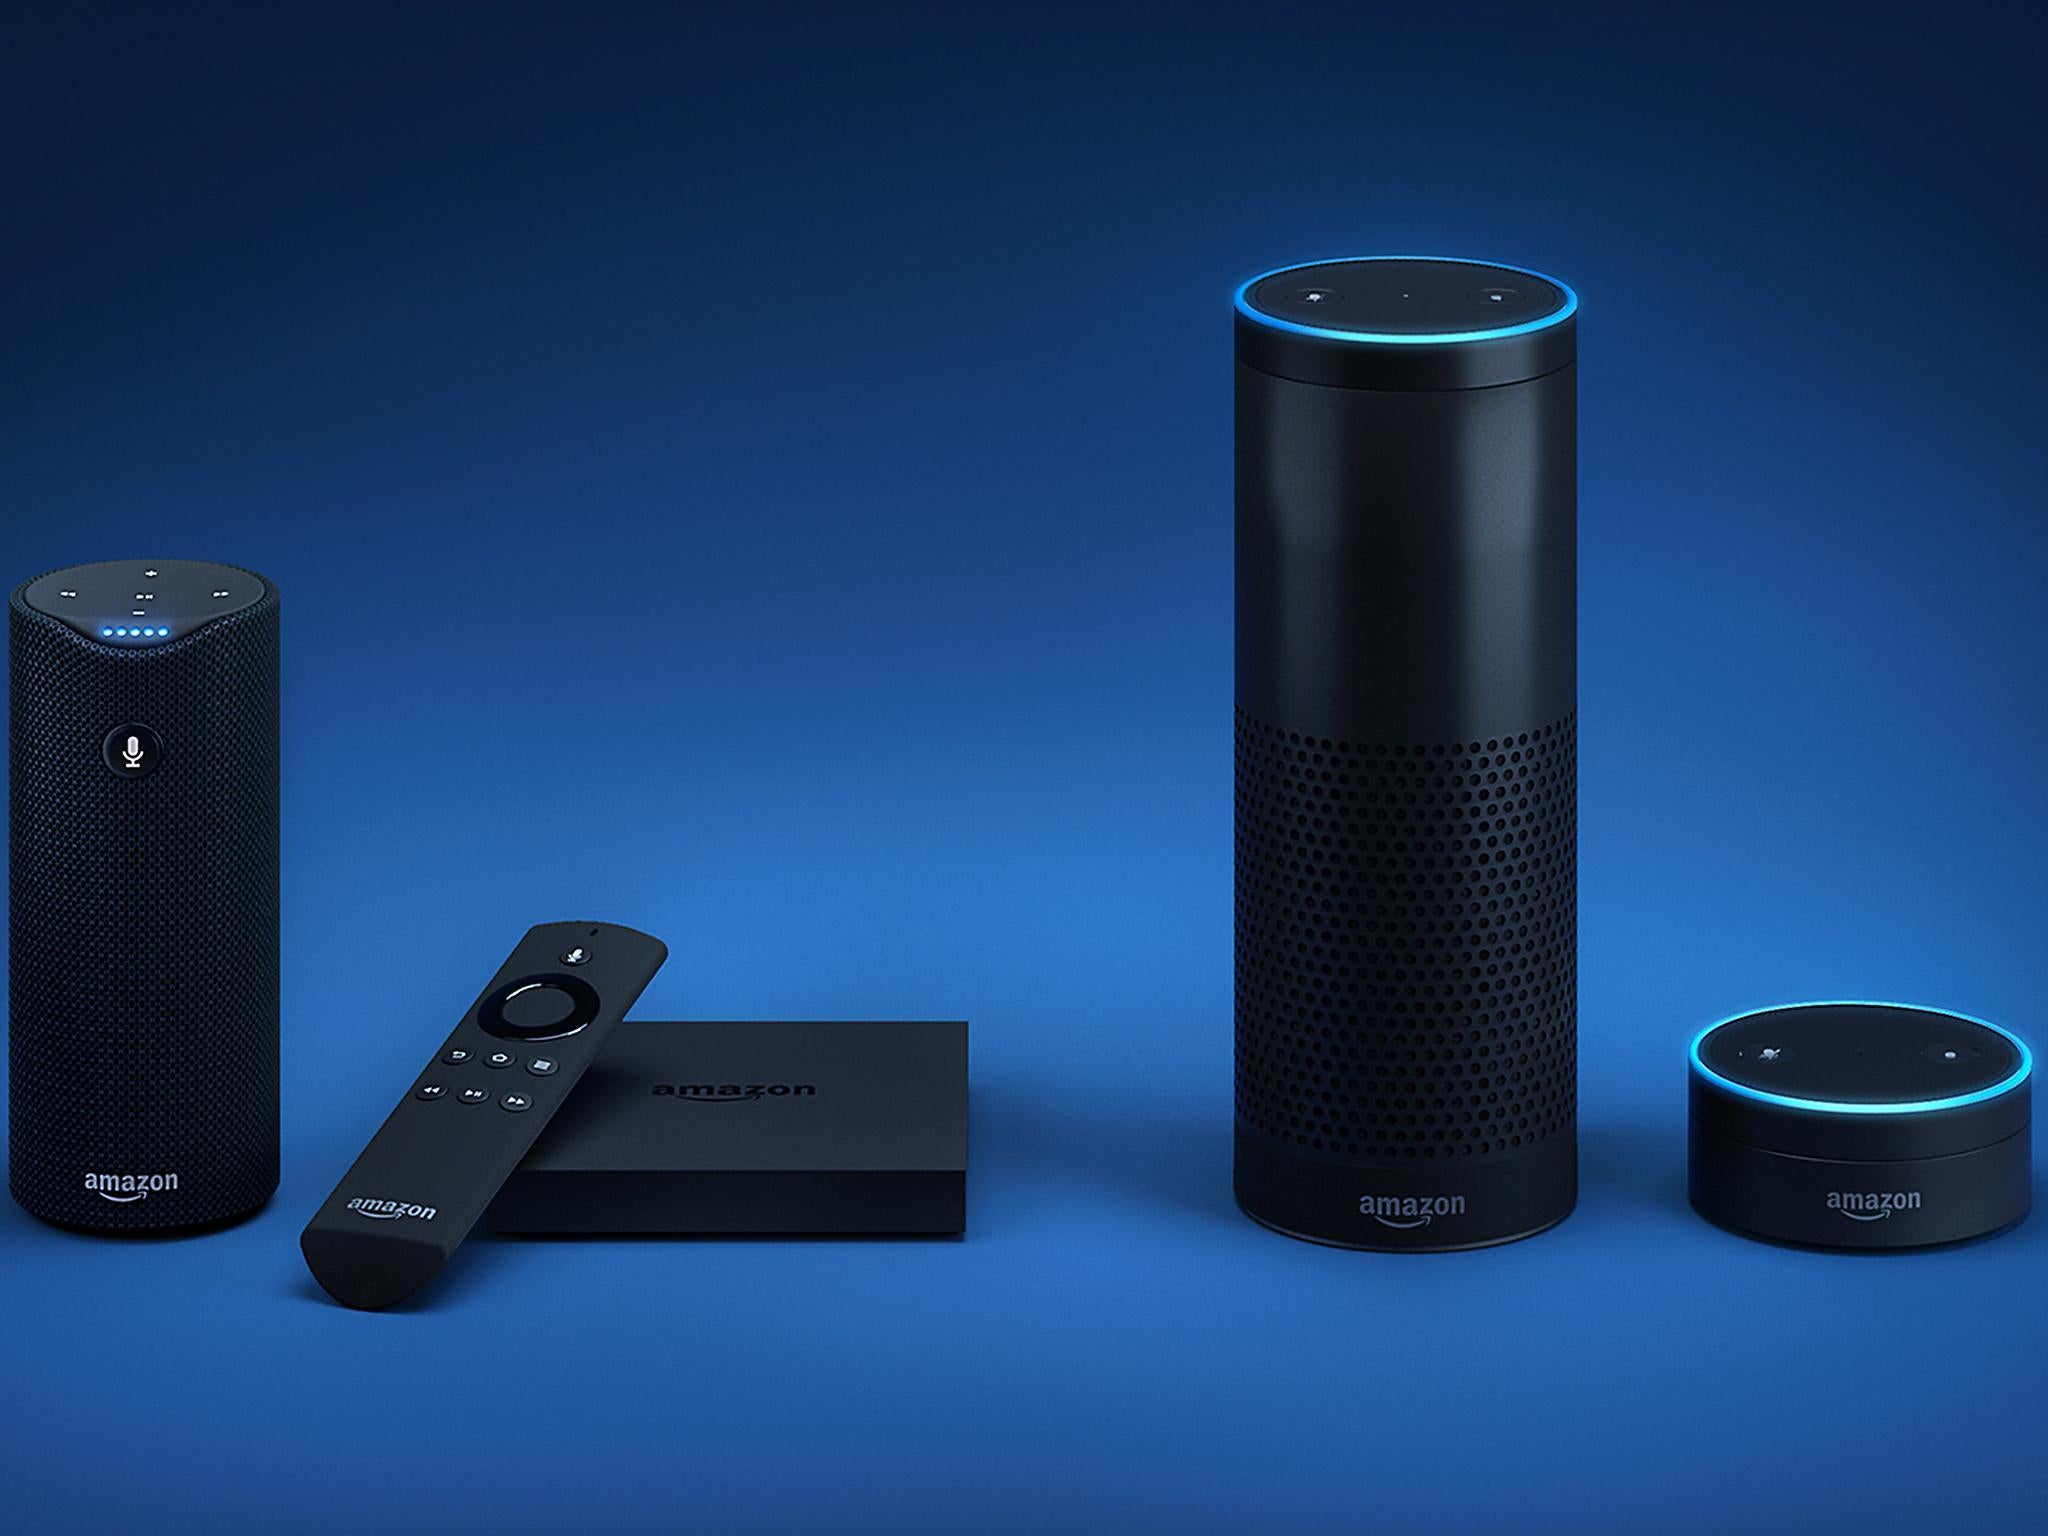 Amazon’s Alexa ‘lives’ in the cloud, allowing the assistant to be communicated with from a range of devices